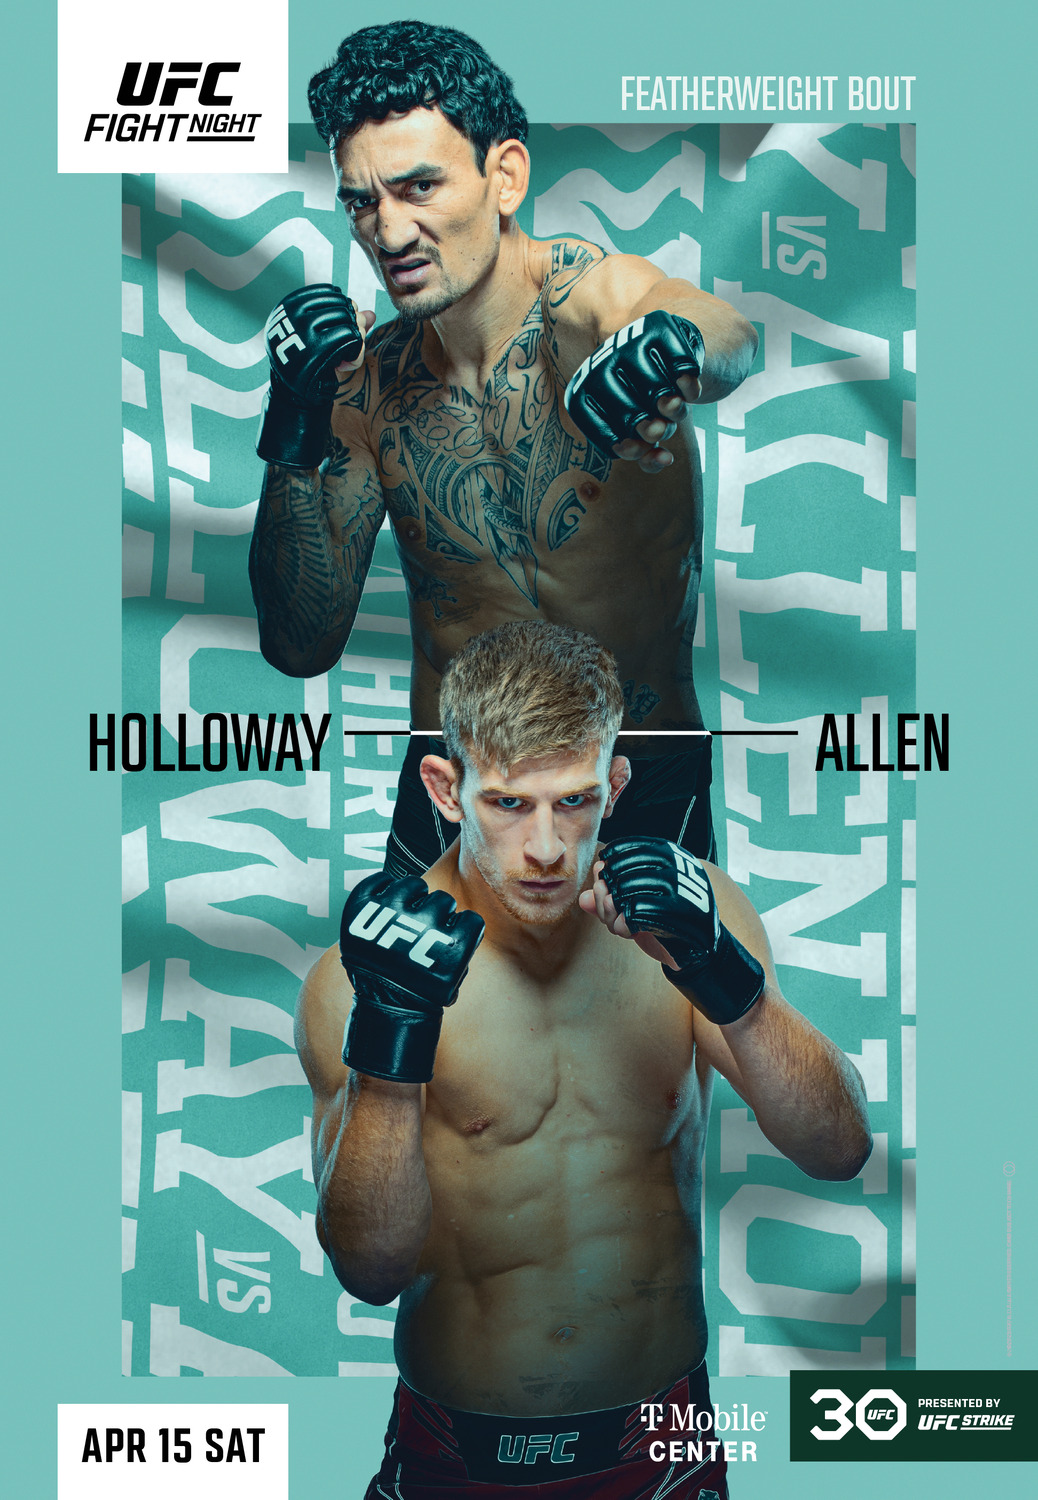 Extra Large TV Poster Image for UFC Fight Night: Holloway vs Allen 